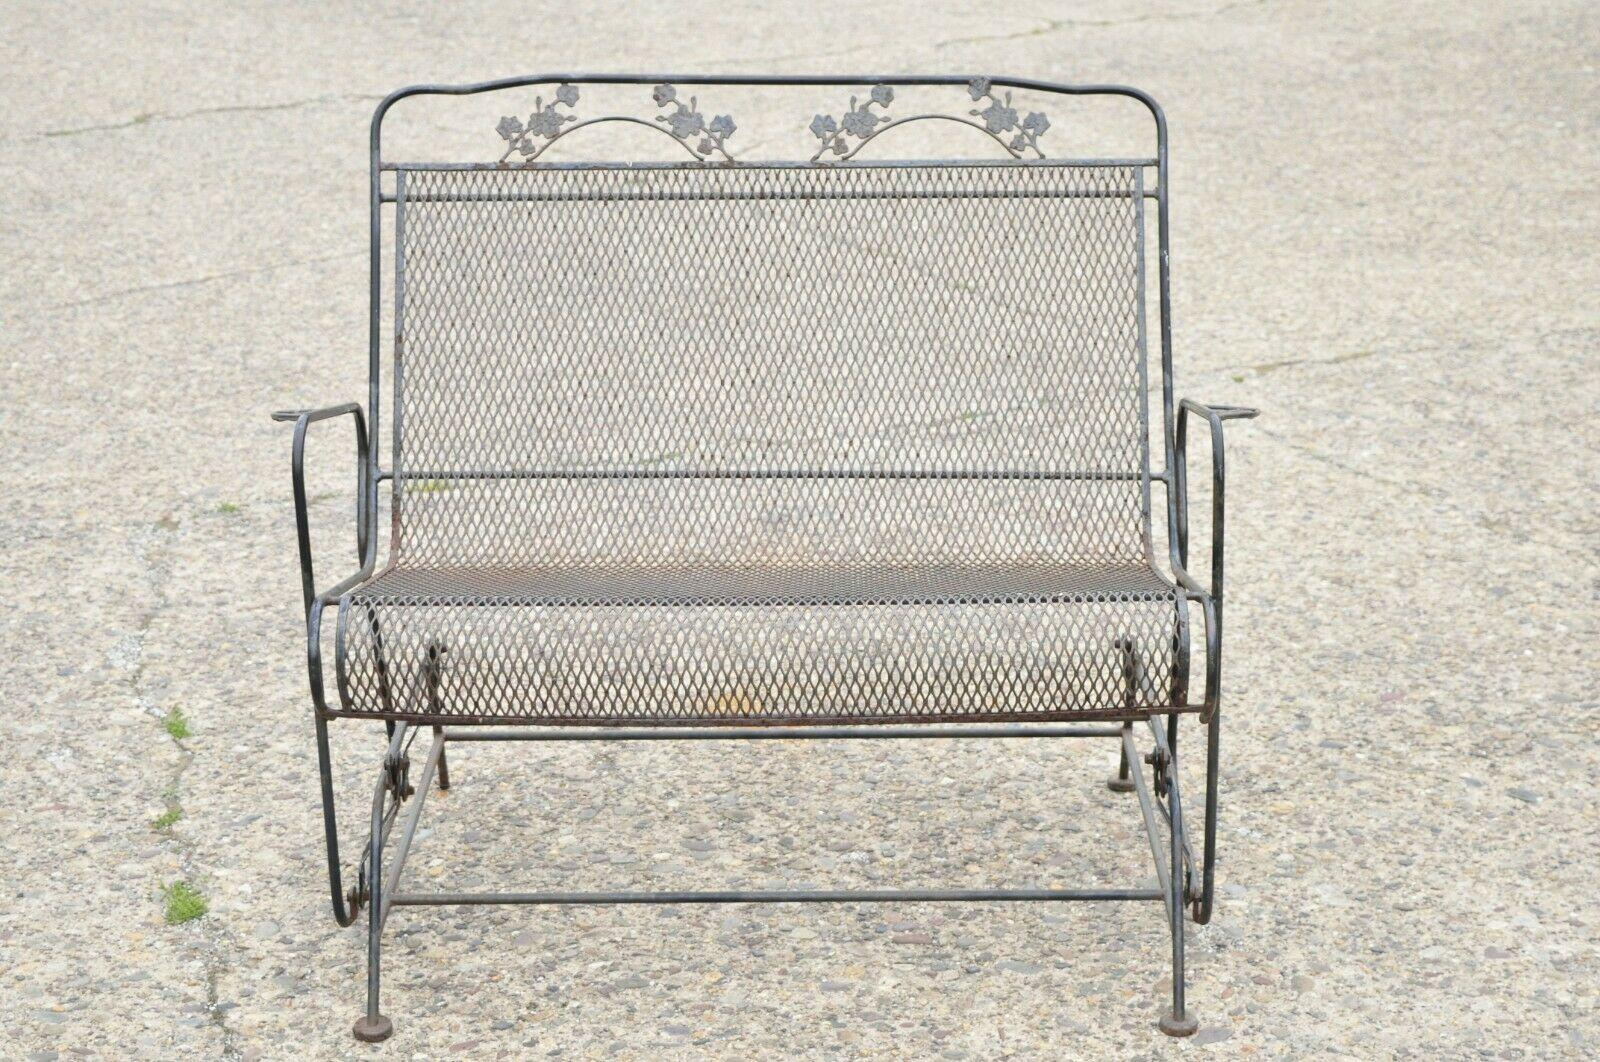 Vintage Wrought Iron Meadowcraft Woodard Maple Leaf Glider Loveseat. Item features maple leaf and vine pattern, metal mesh seat, gliding frame, wrought iron construction, very nice vintage item, great style and form. Circa Mid 20th Century.